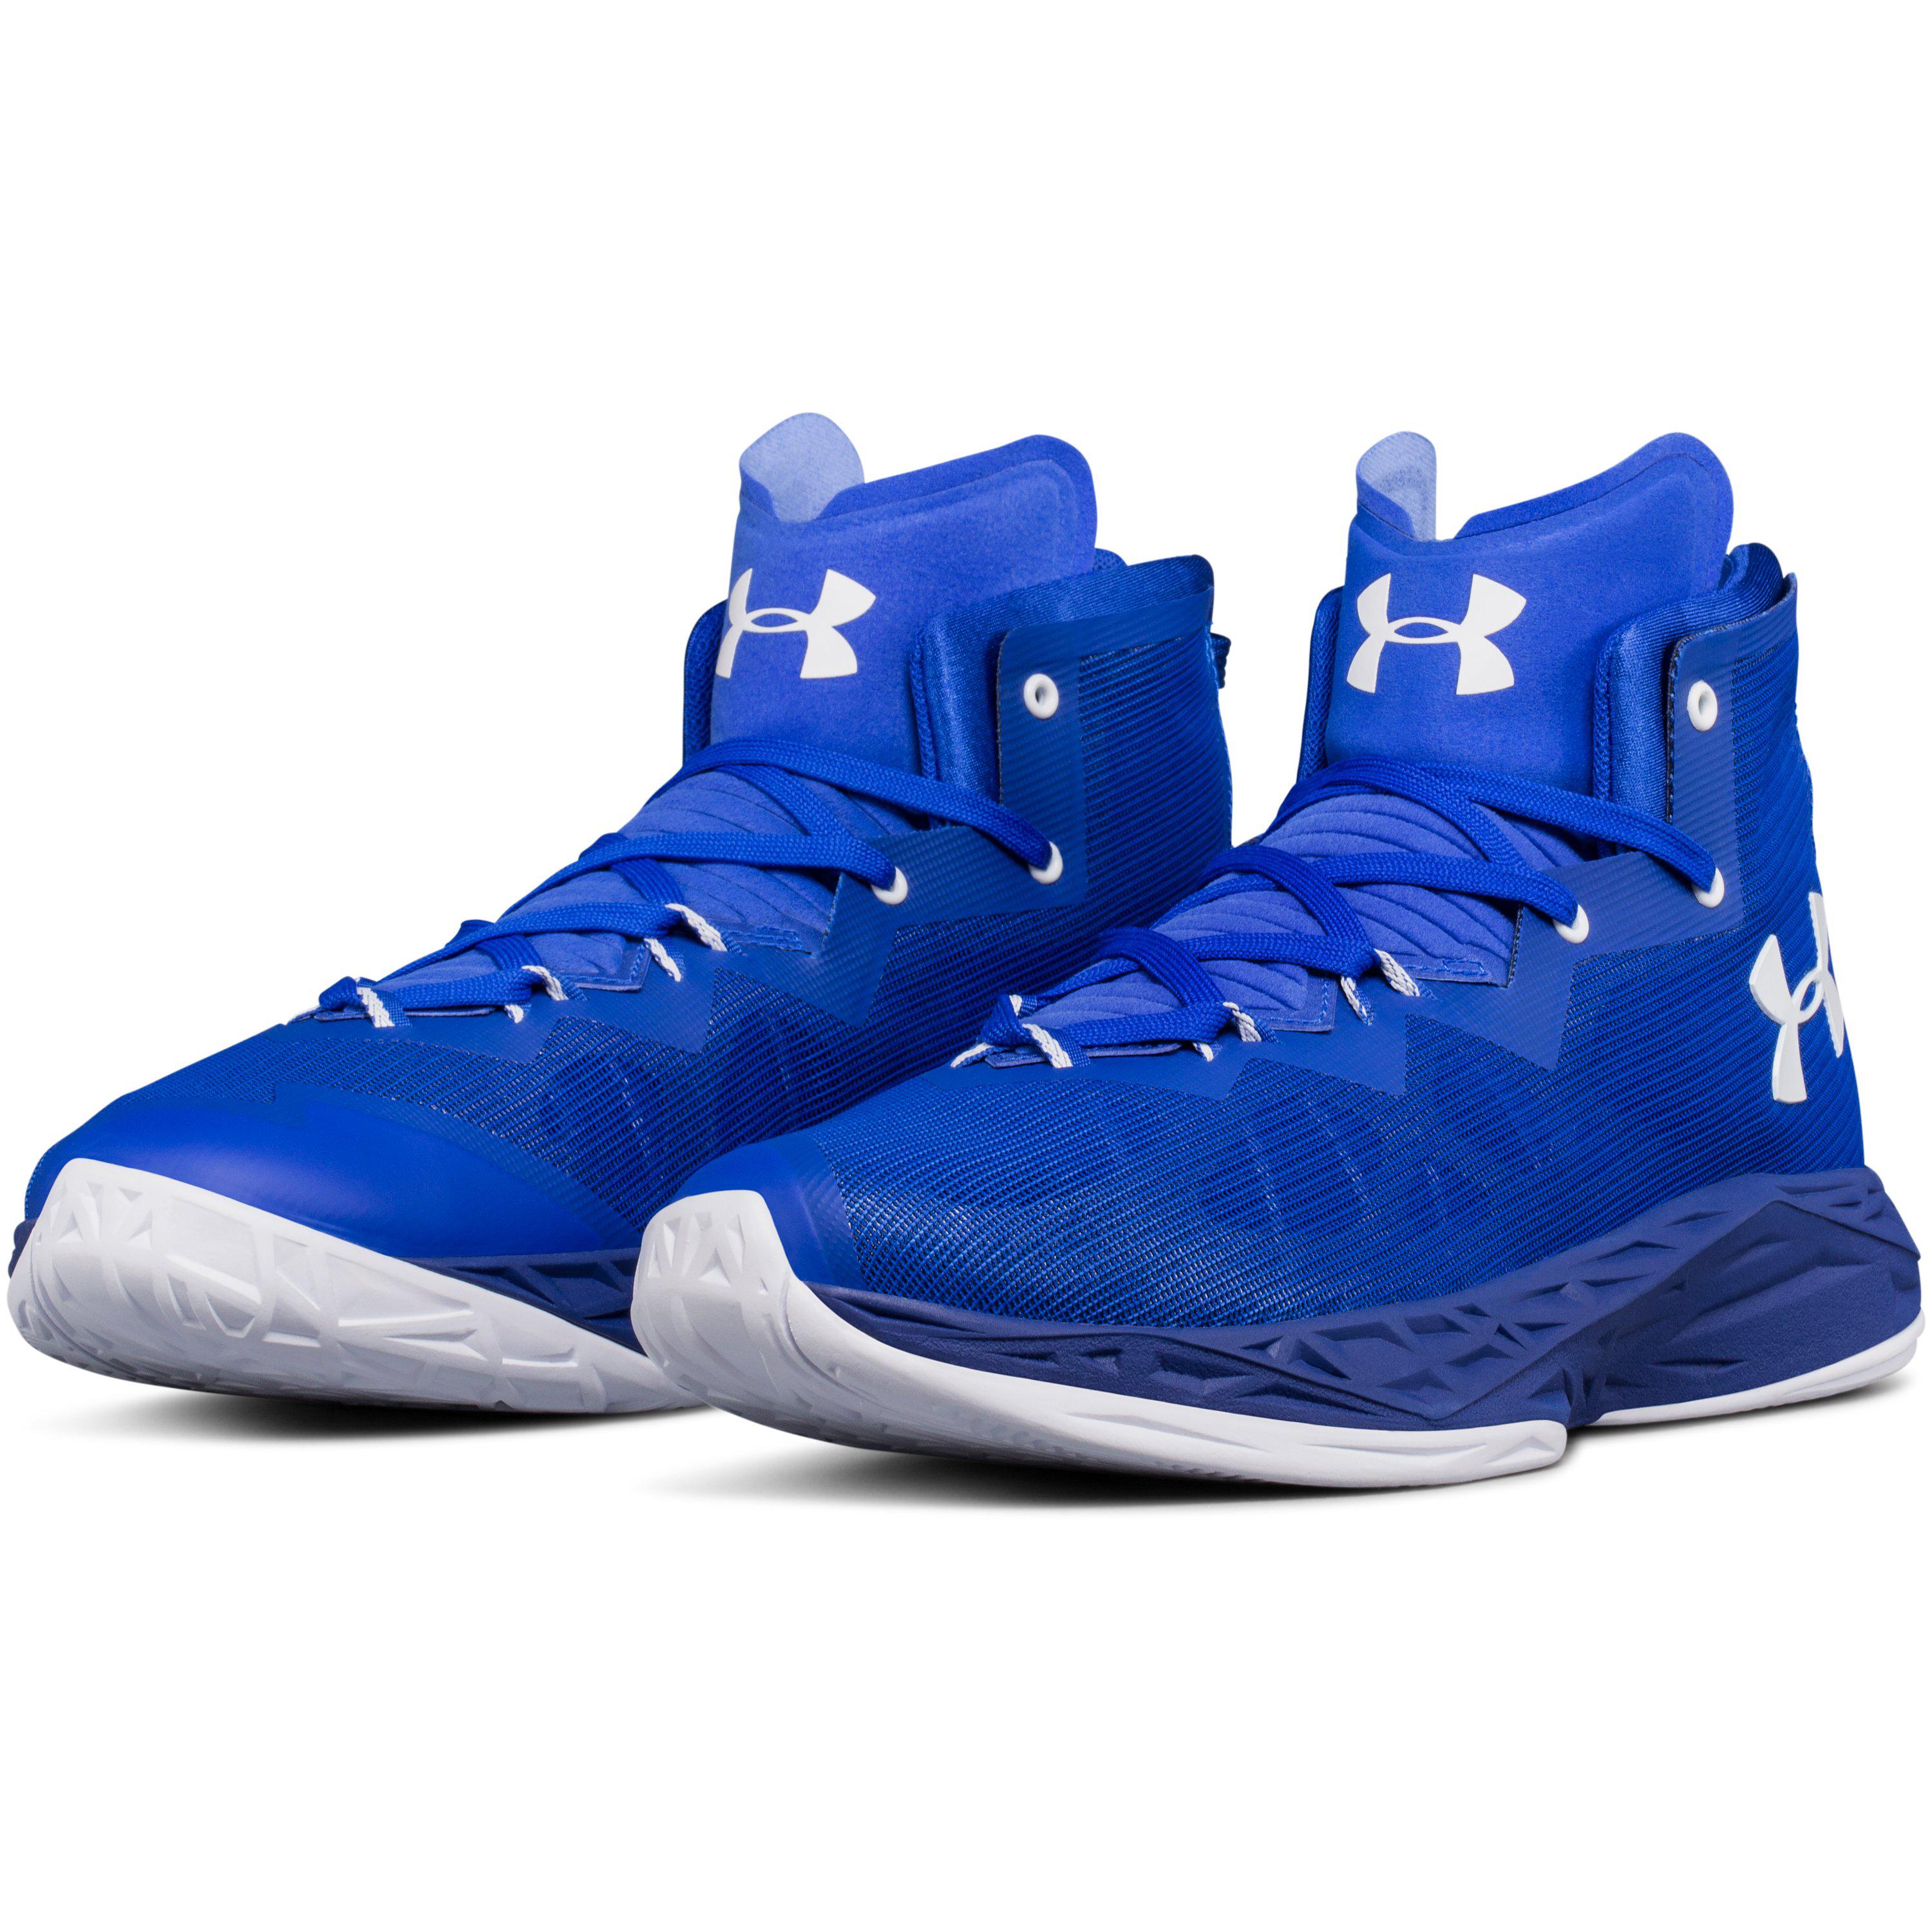 Under Amour Basketball Shoes